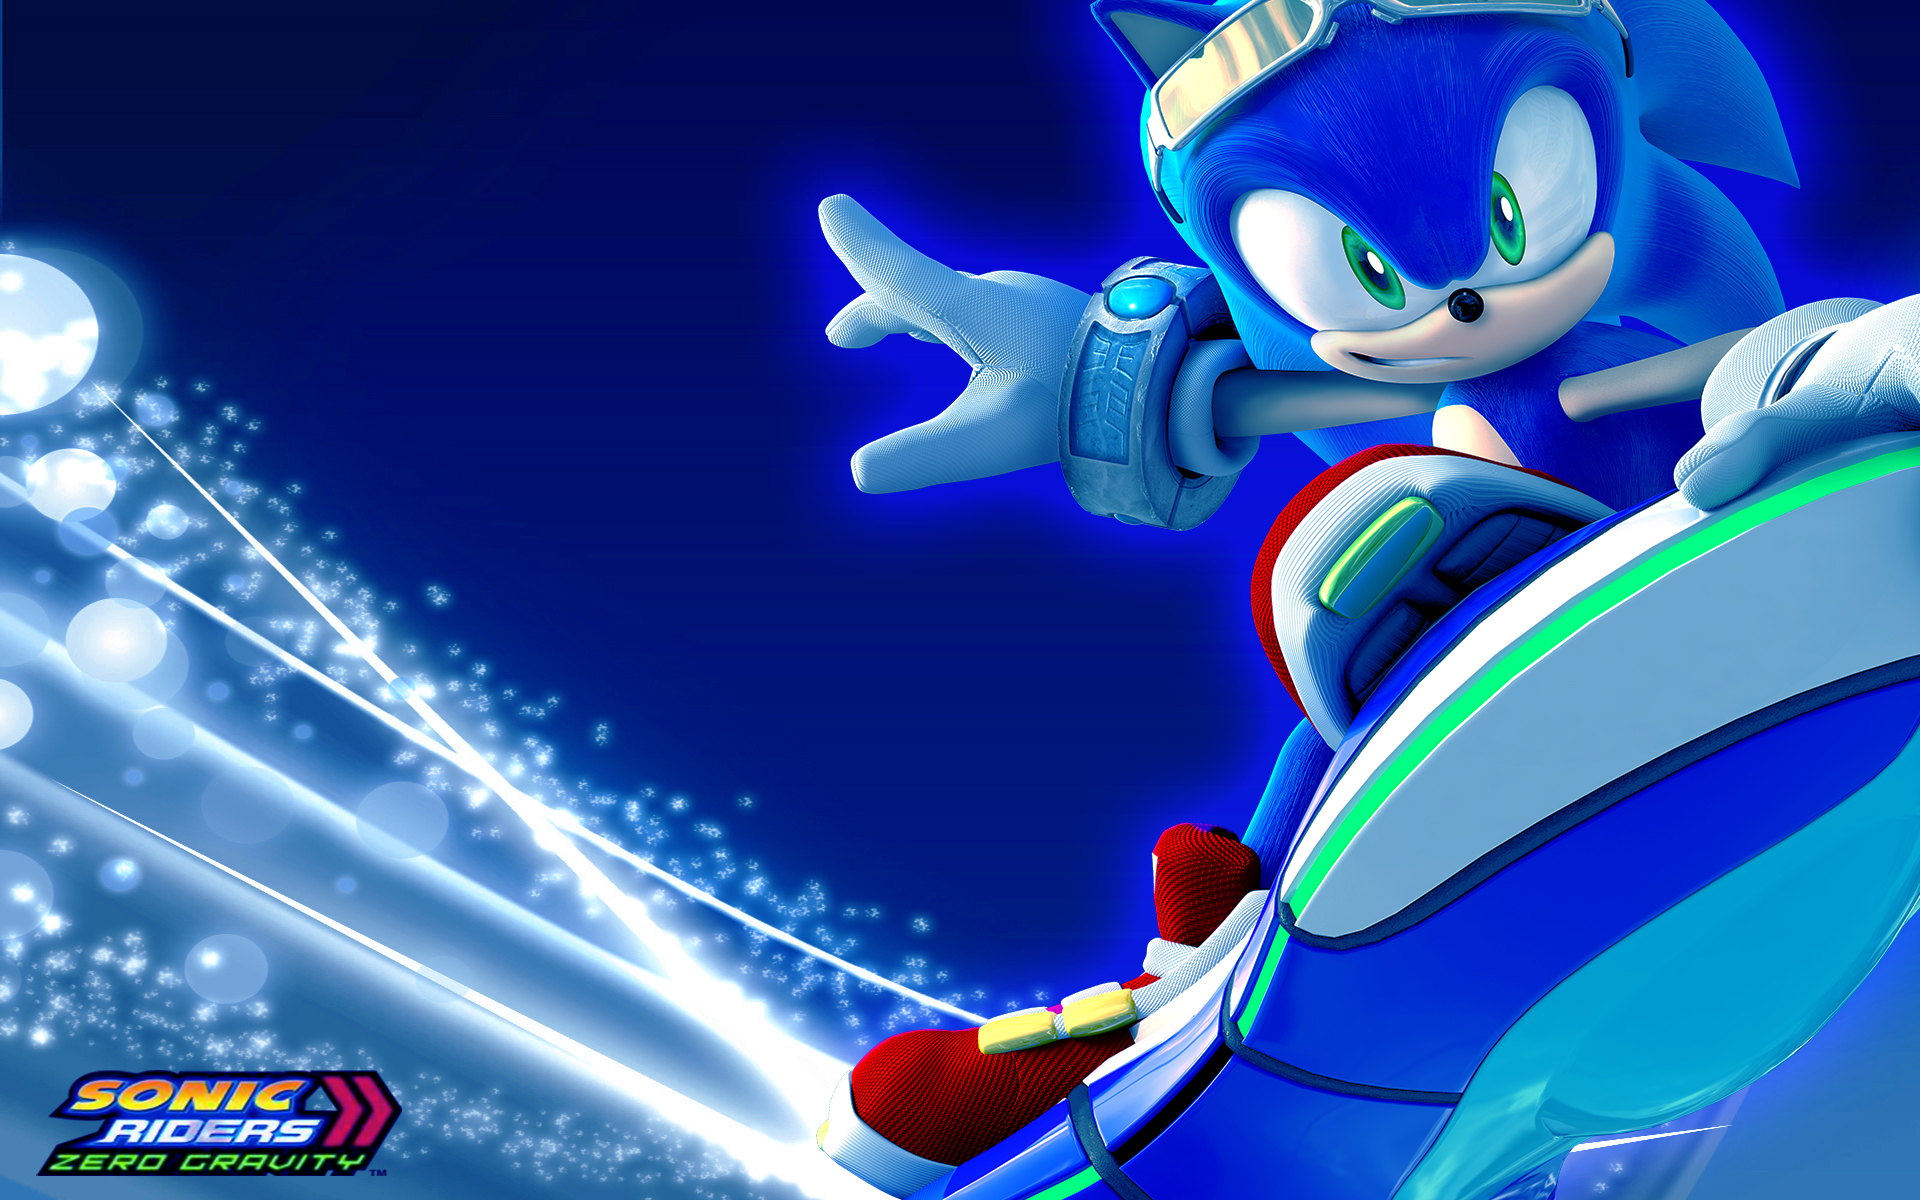 Cool sonic wallpapers